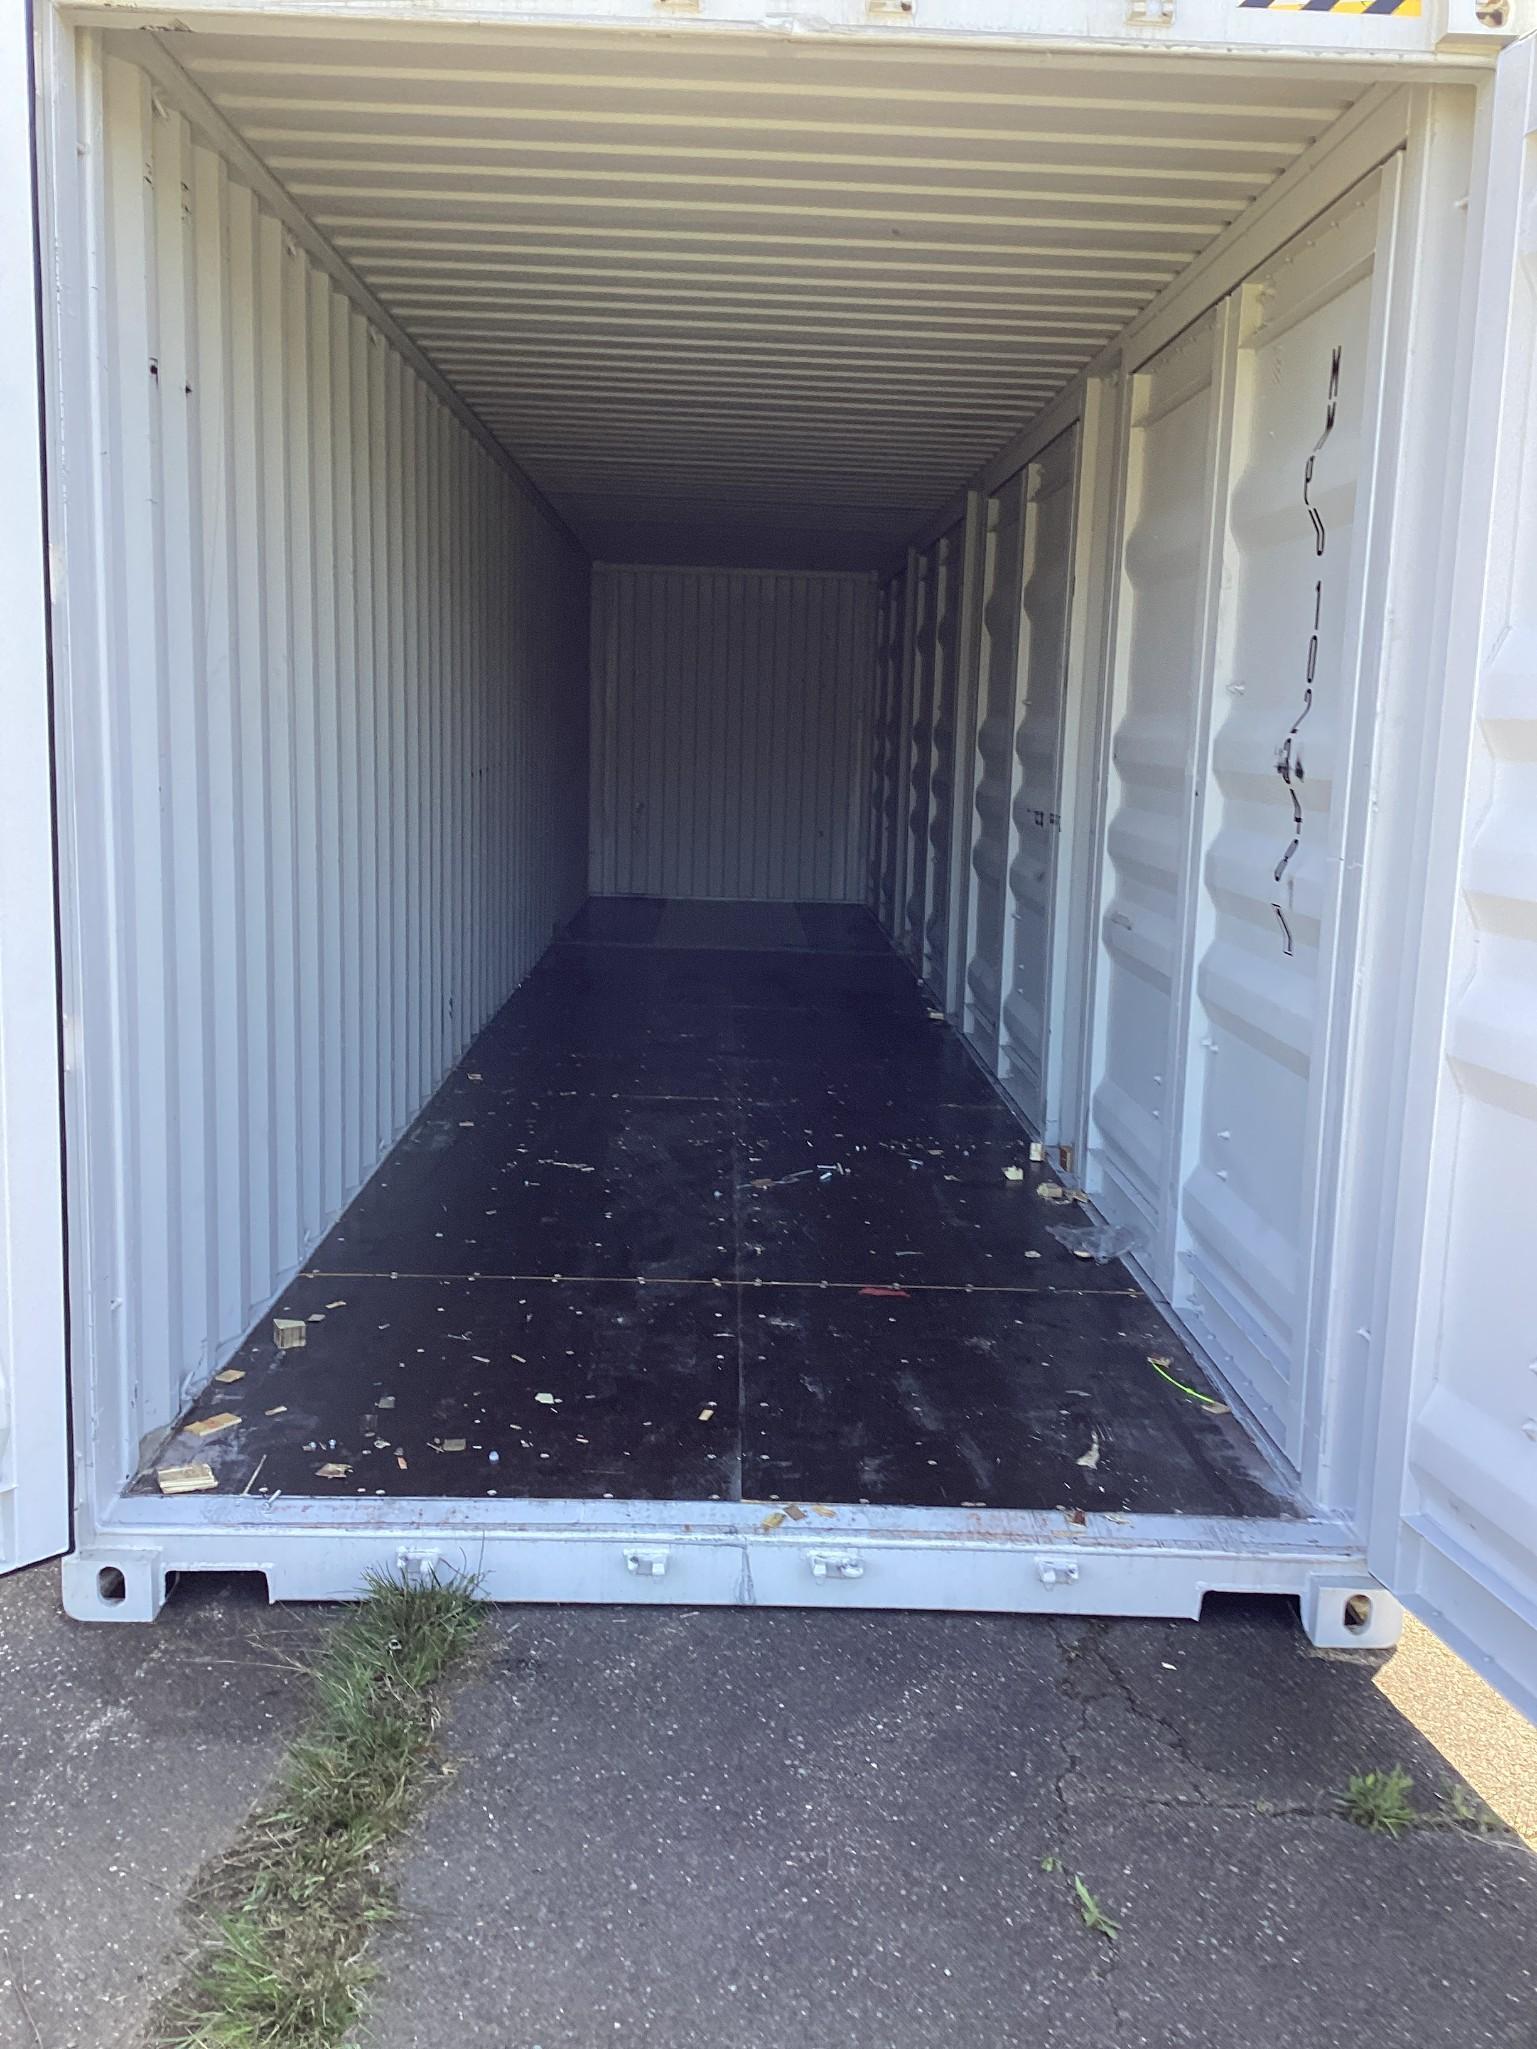 New 1 Trip High Cube Multi Door 40' Shipping Container